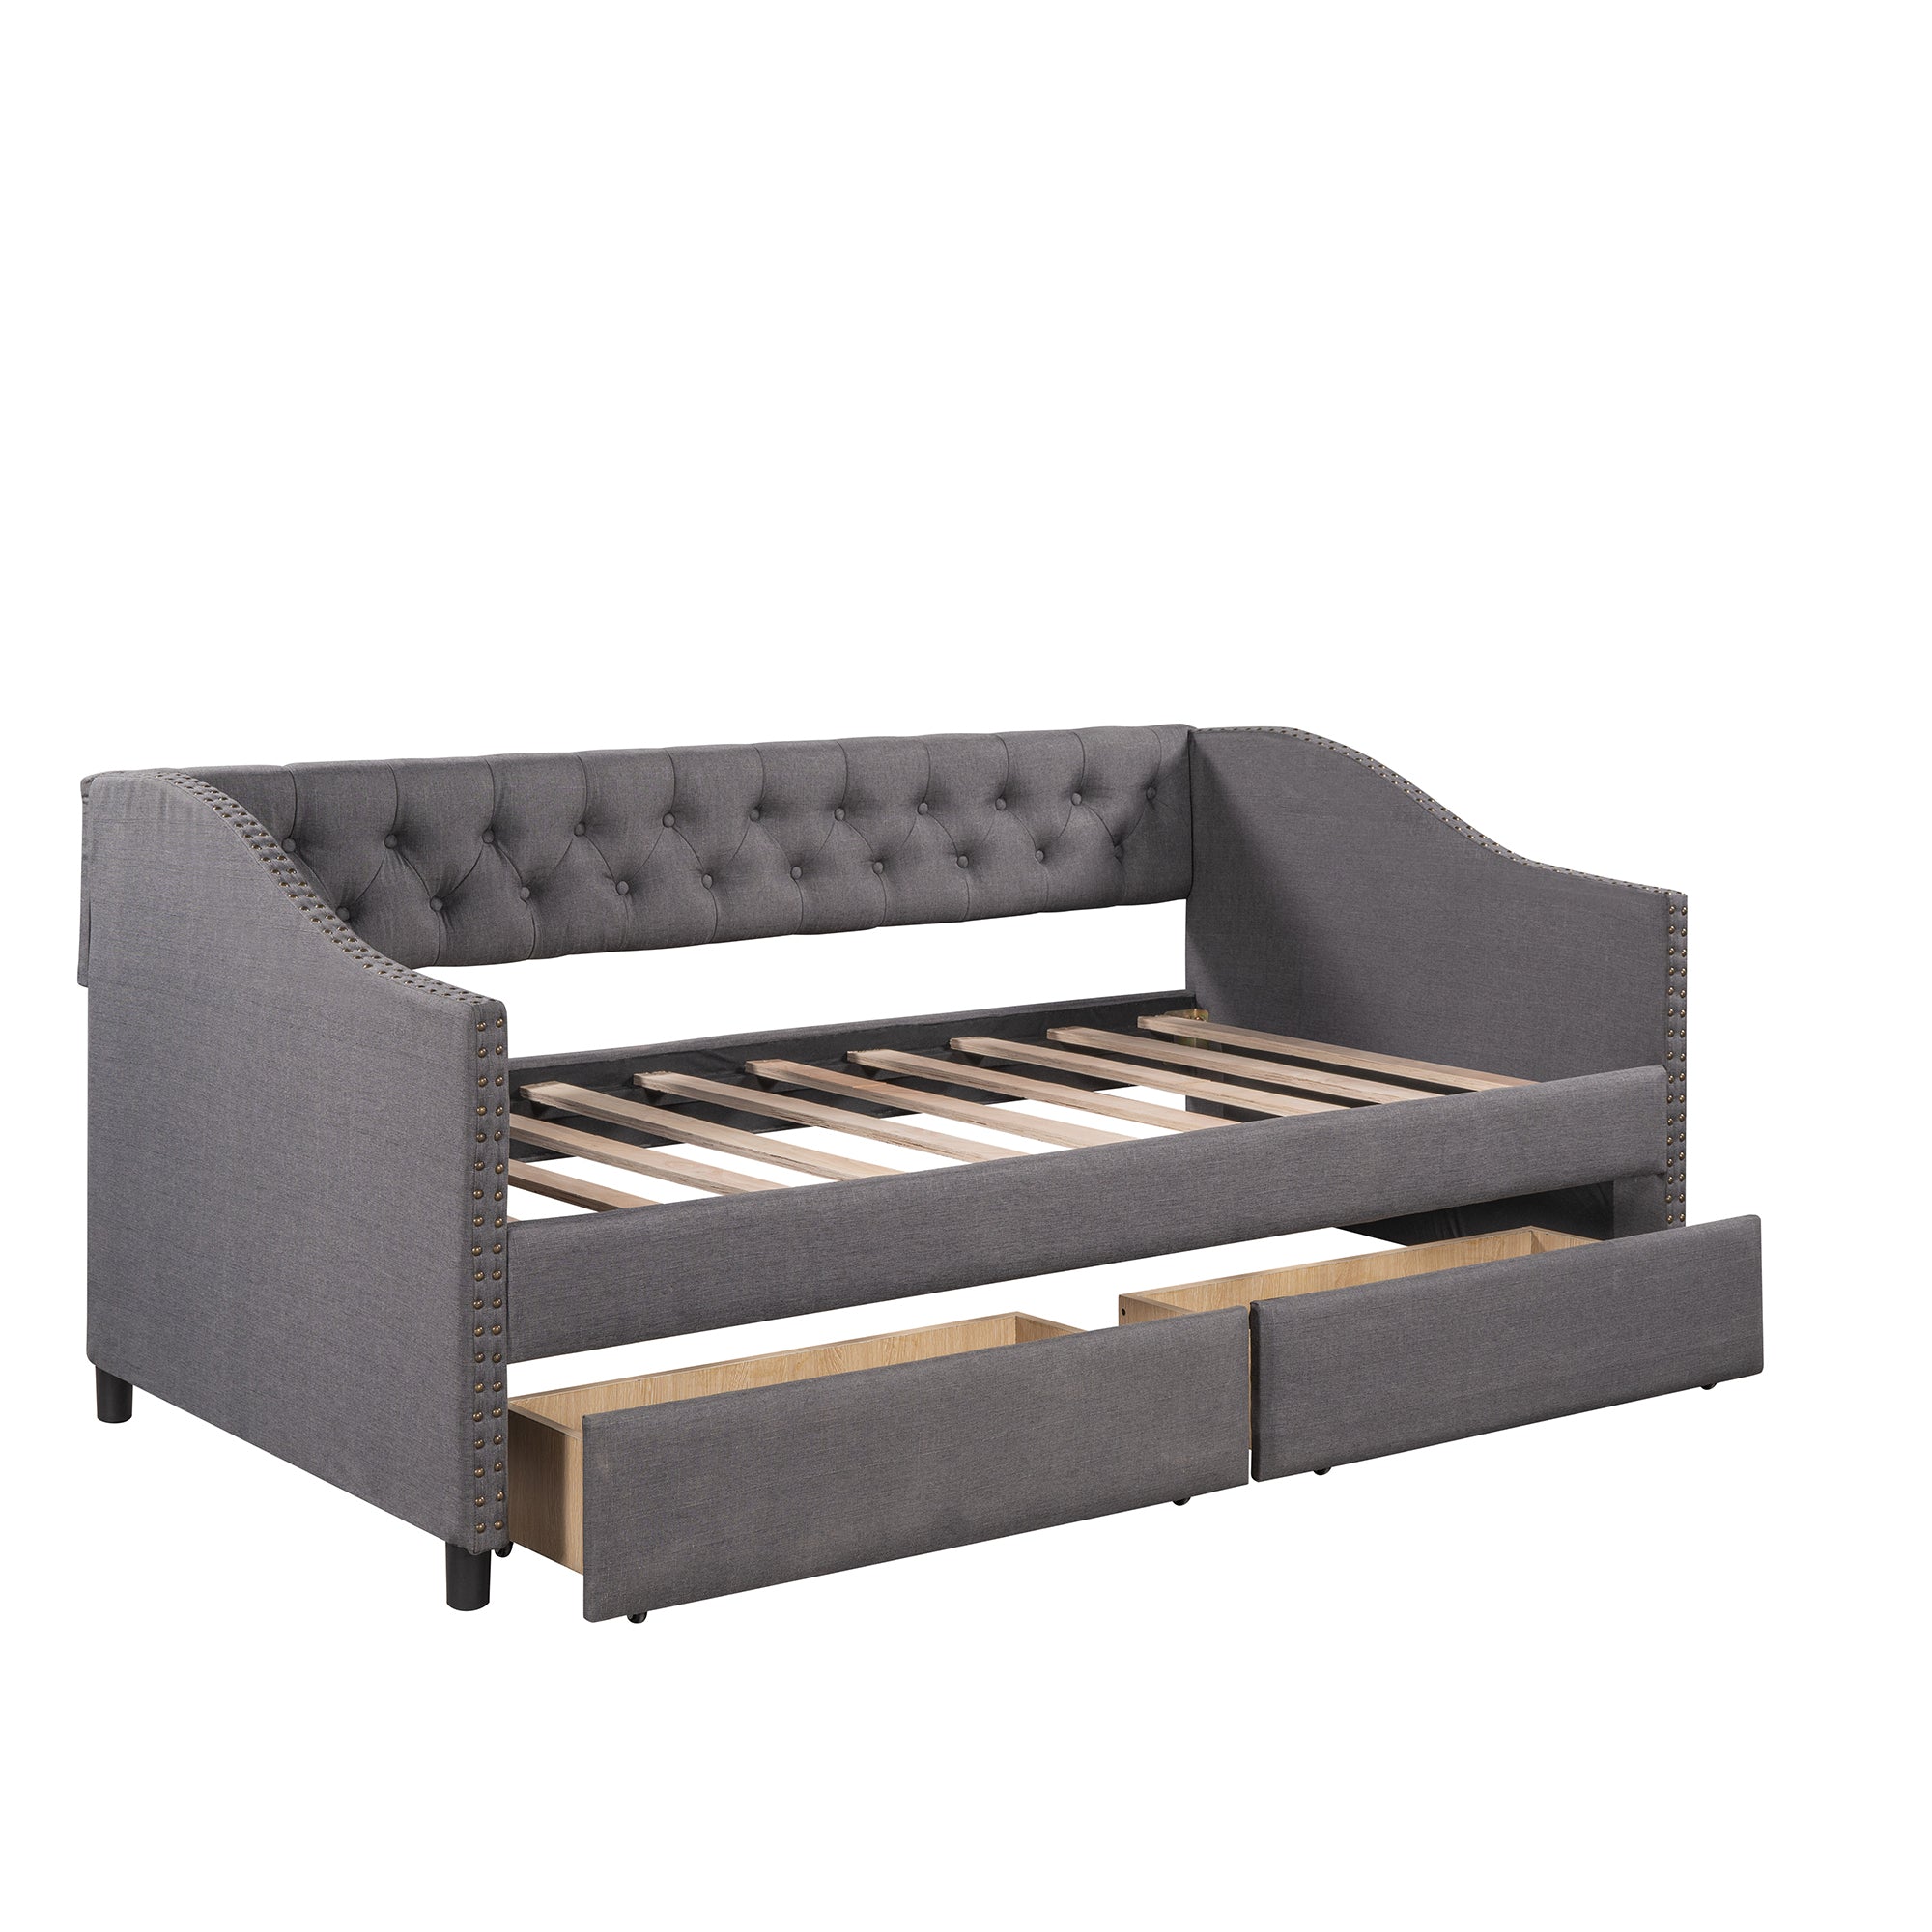 Upholstered daybed with Two Drawers Wood Slat Support Twin Size (Gray)